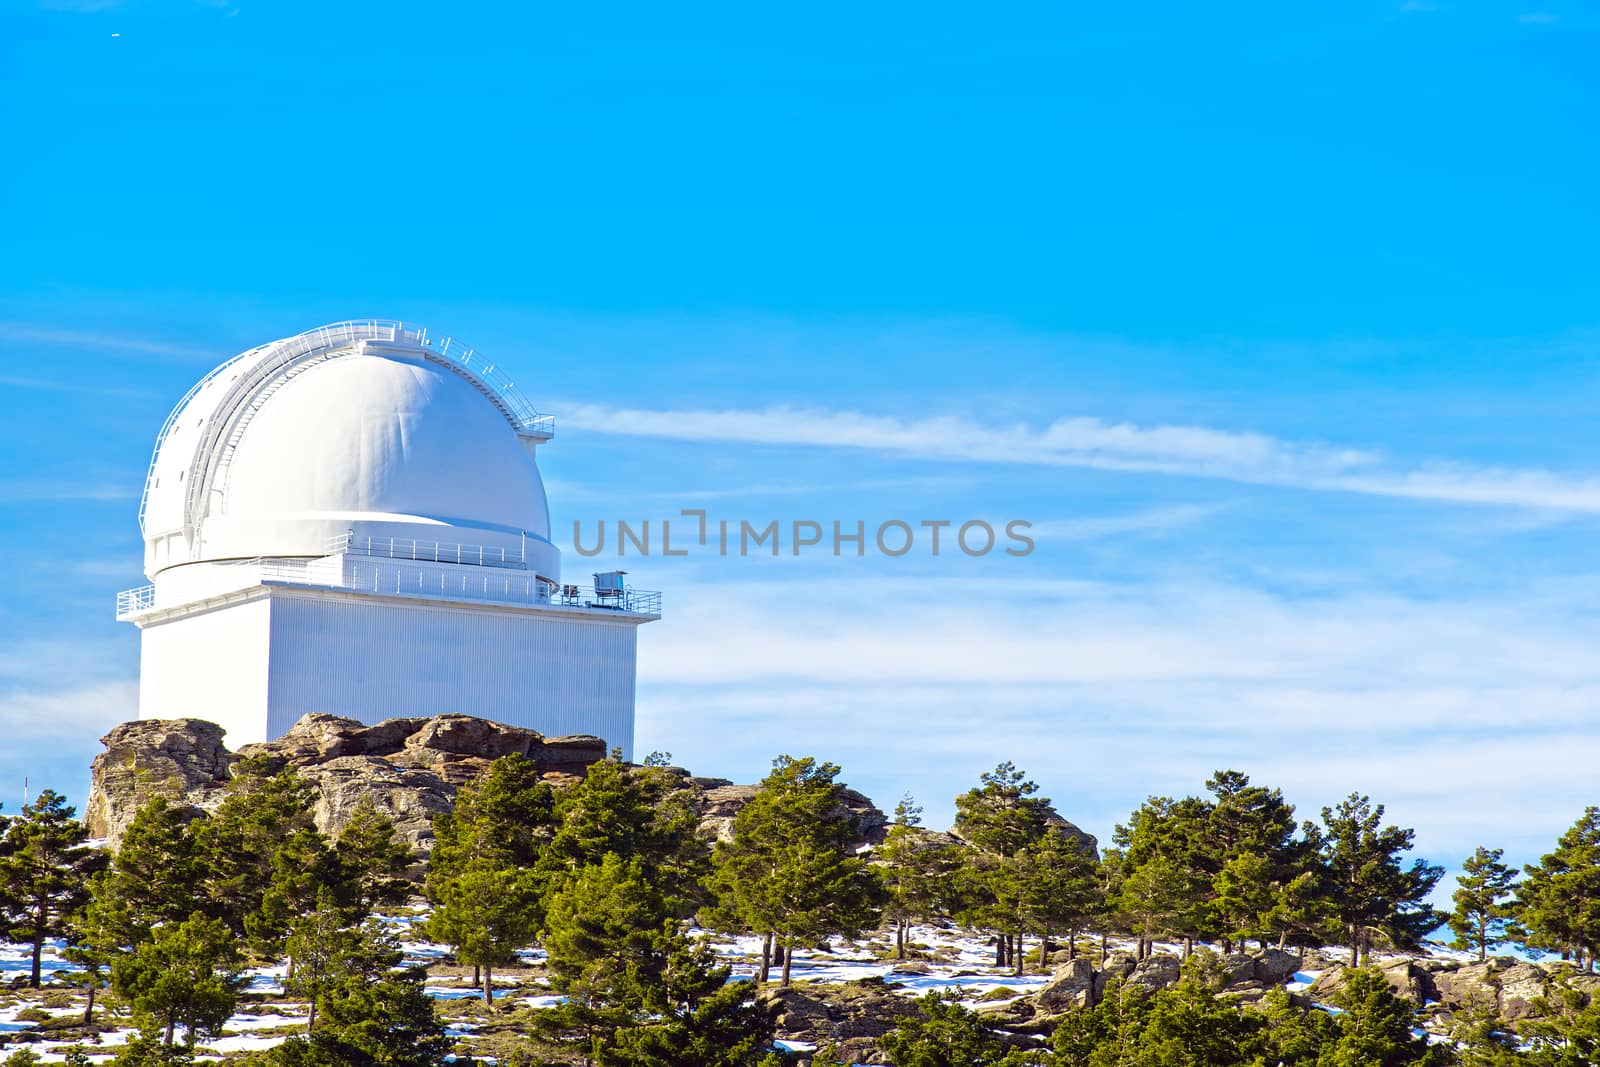 View of Calar Alto Observatory at the snowy mountain top in Almeria, Andalusia, Spain, 2019. Sky passing through against the domes